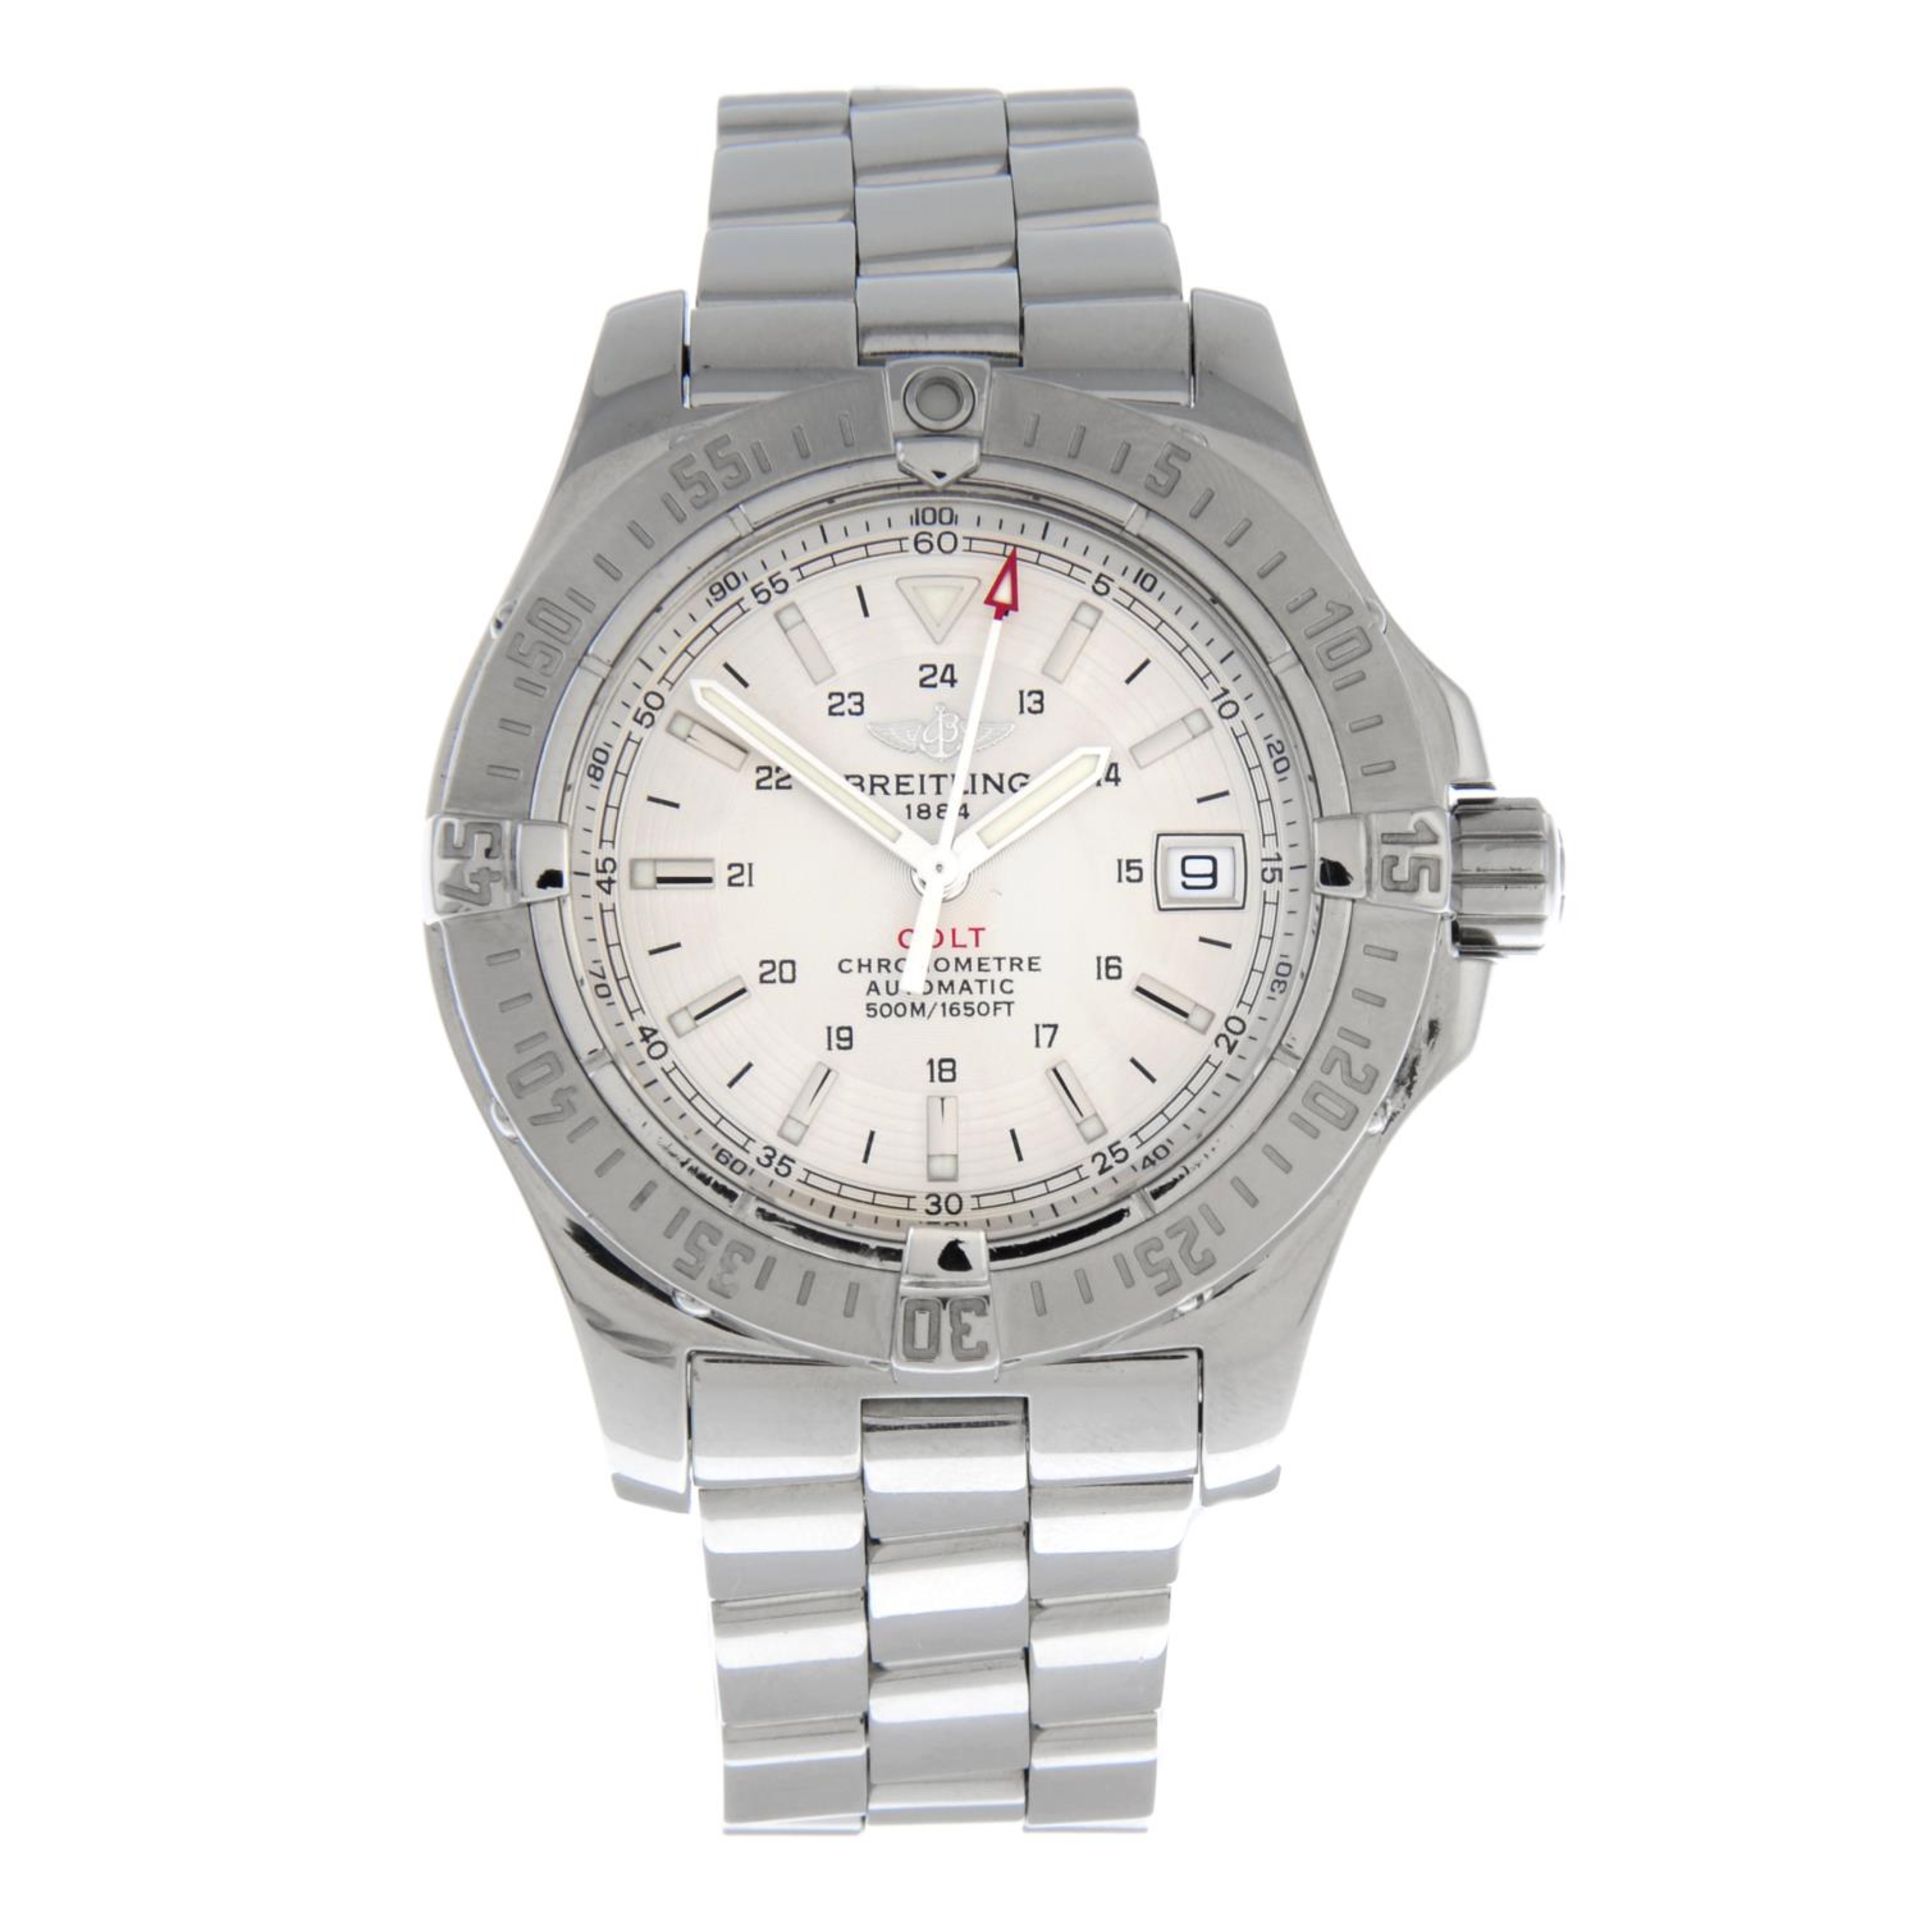 BREITLING - a Colt bracelet watch.Stainless steel case with calibrated bezel.